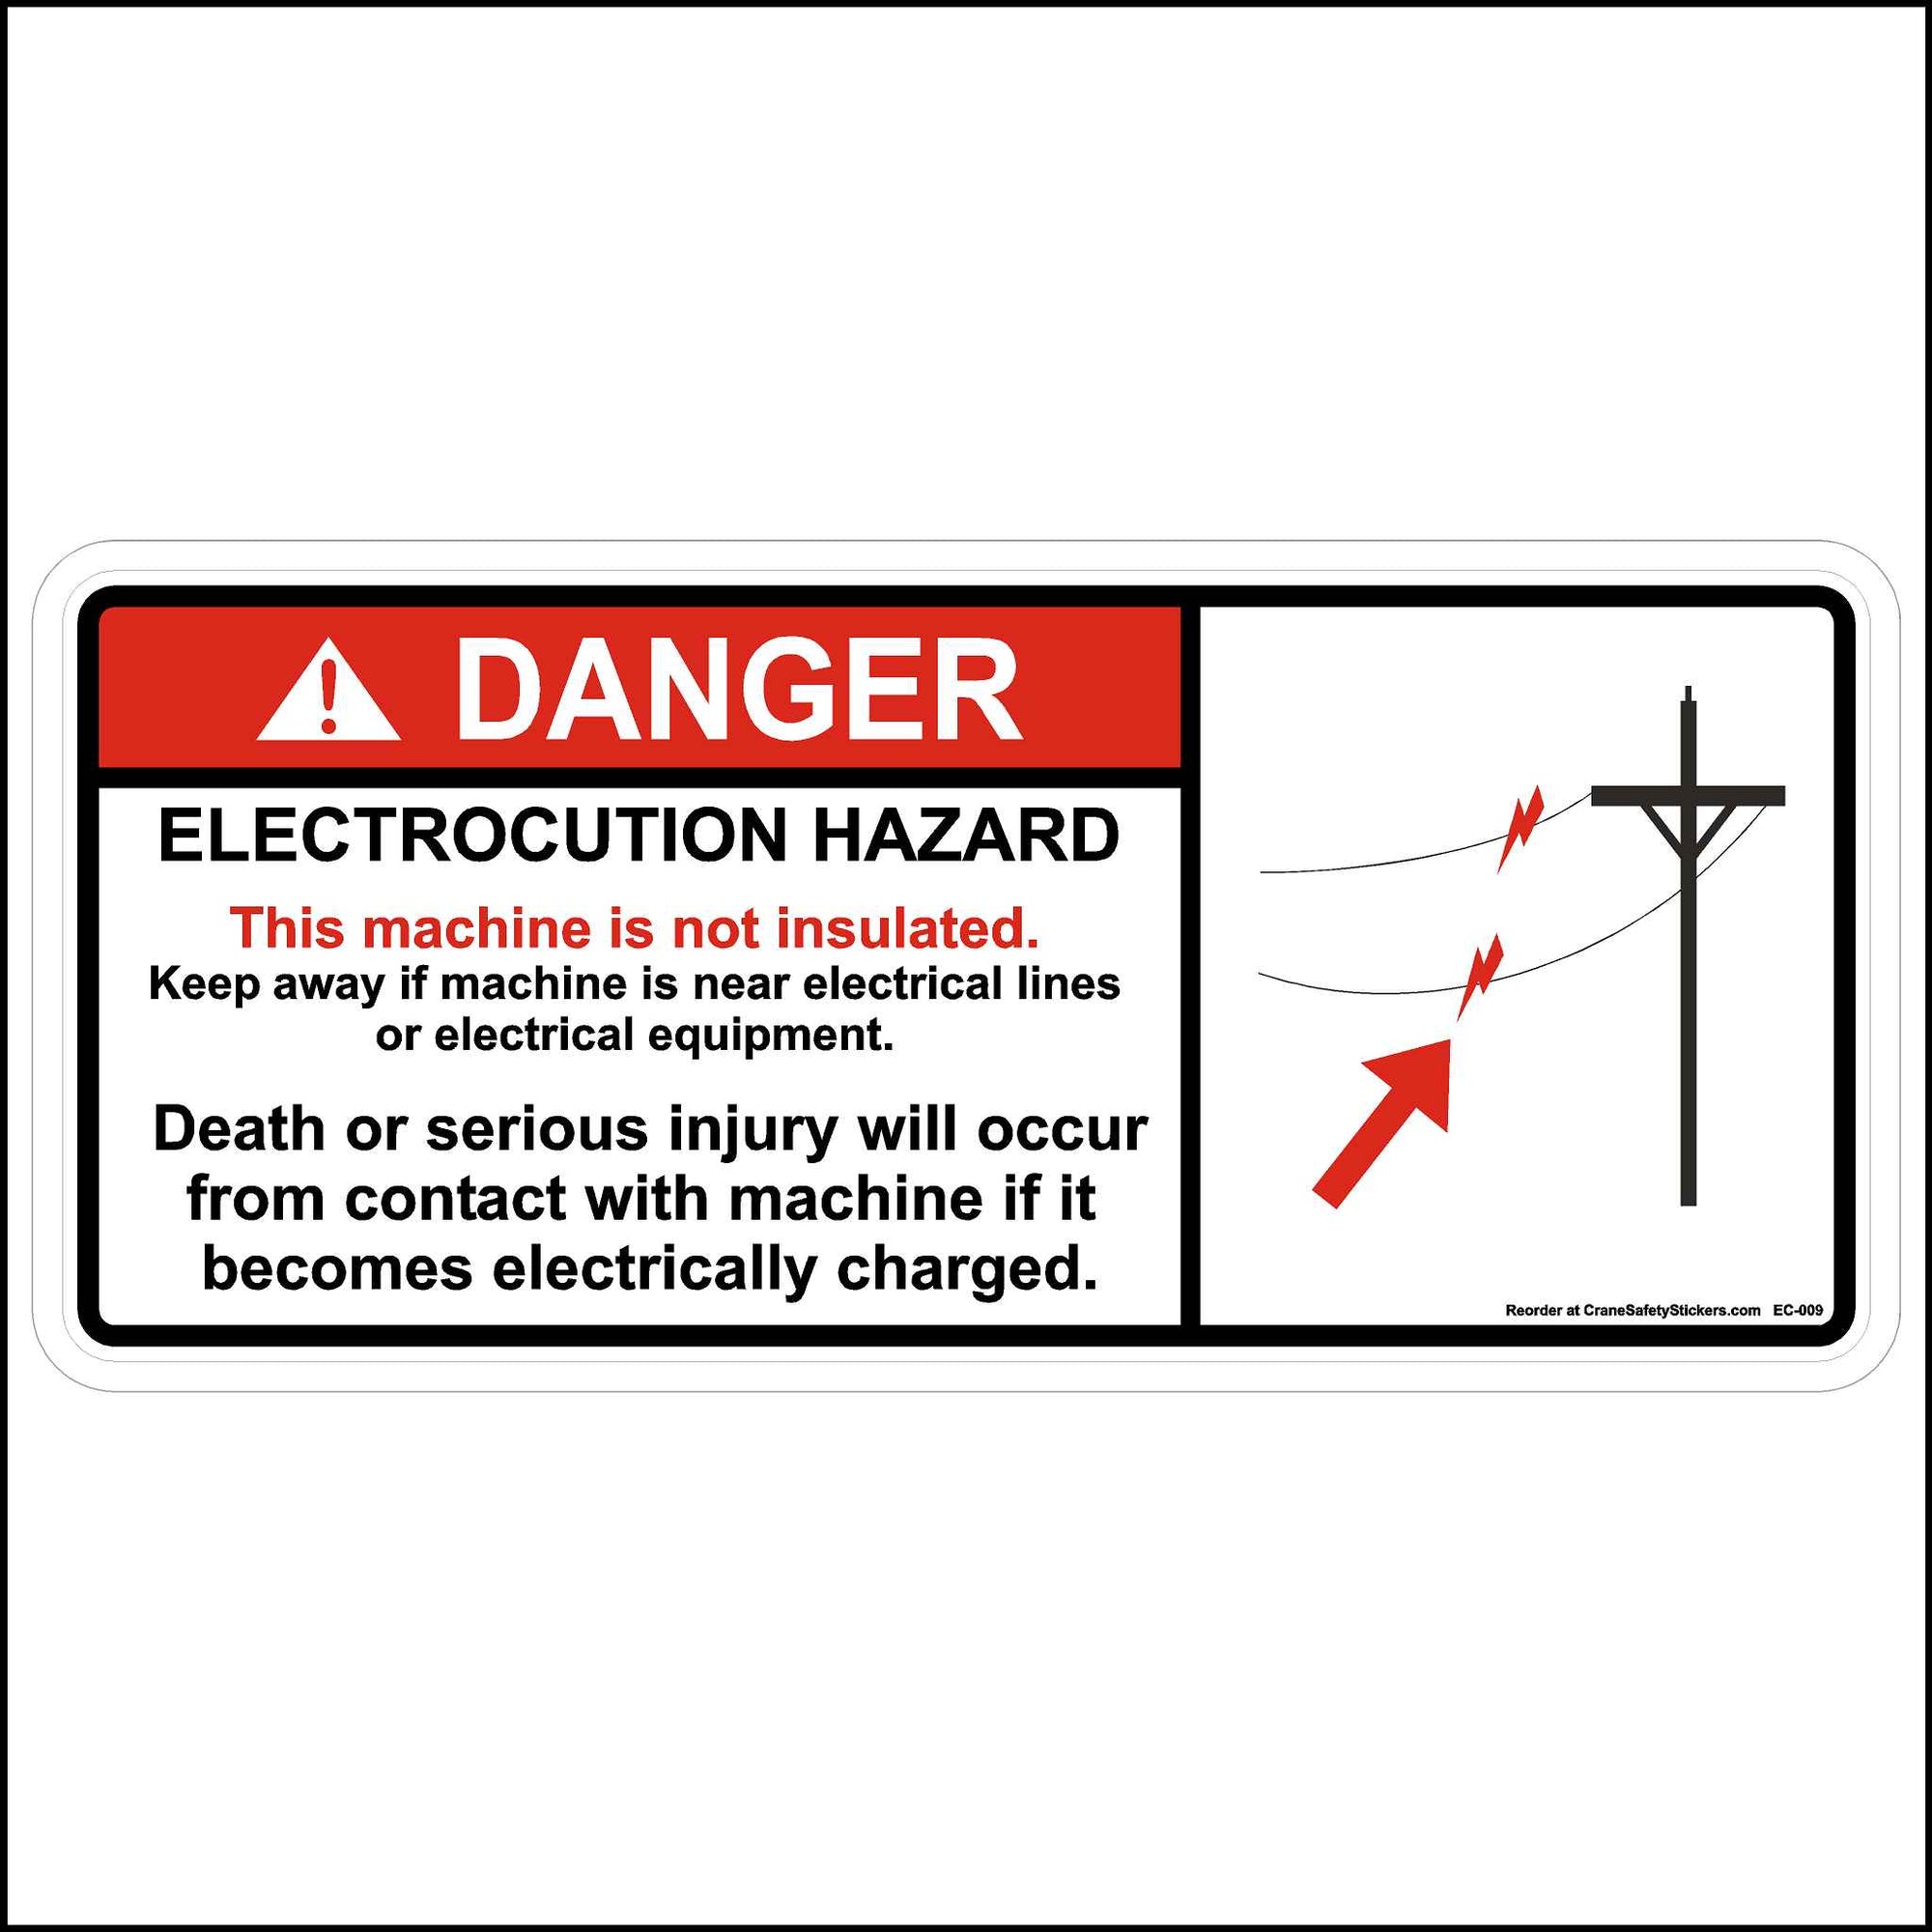 This Machine Is Not Insulated Decal Printed with. DANGER ELECTROCUTION HAZARD. This machine is not insulted. Keep away if the machine is near electrical lines or electrical equipment. Death or serious injury will occur from contact with the machine if it becomes electrically charged.